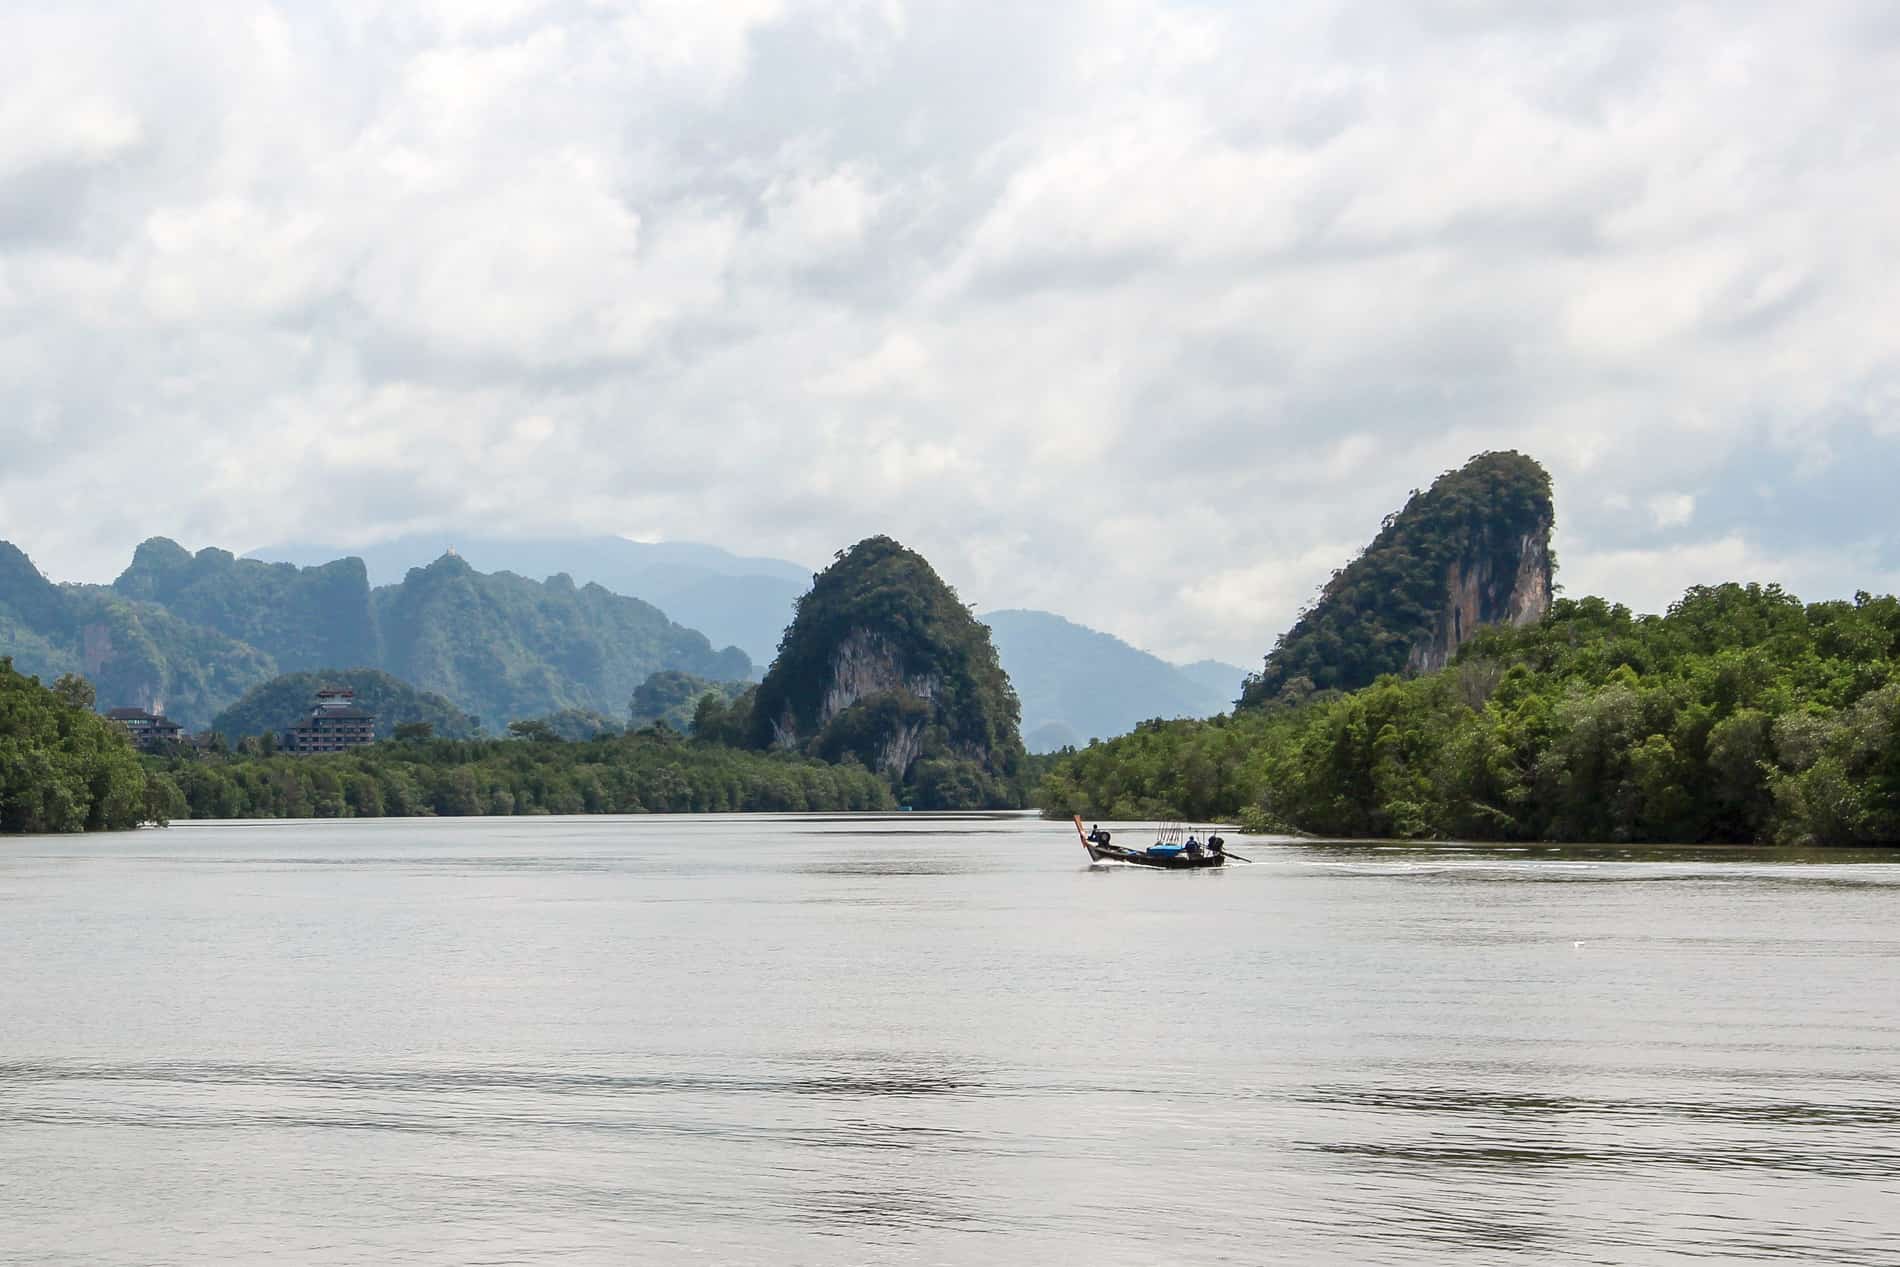 A boat on the stillwater of Krabi River in Thailand, backed by forest and limestone formations.